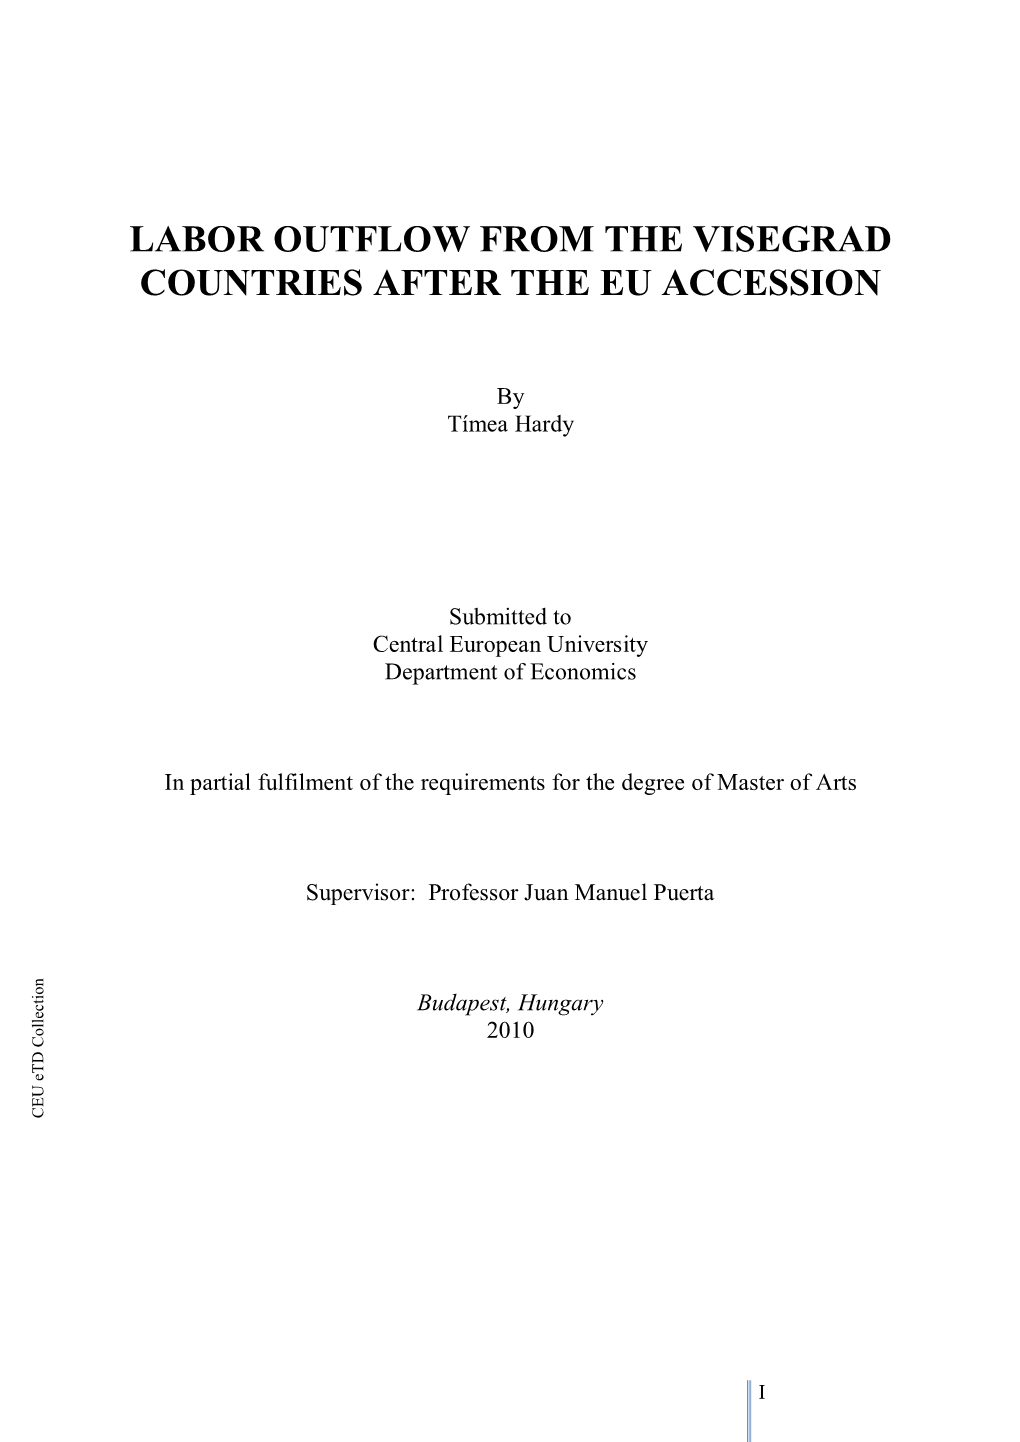 Labor Outflow from the Visegrad Countries After